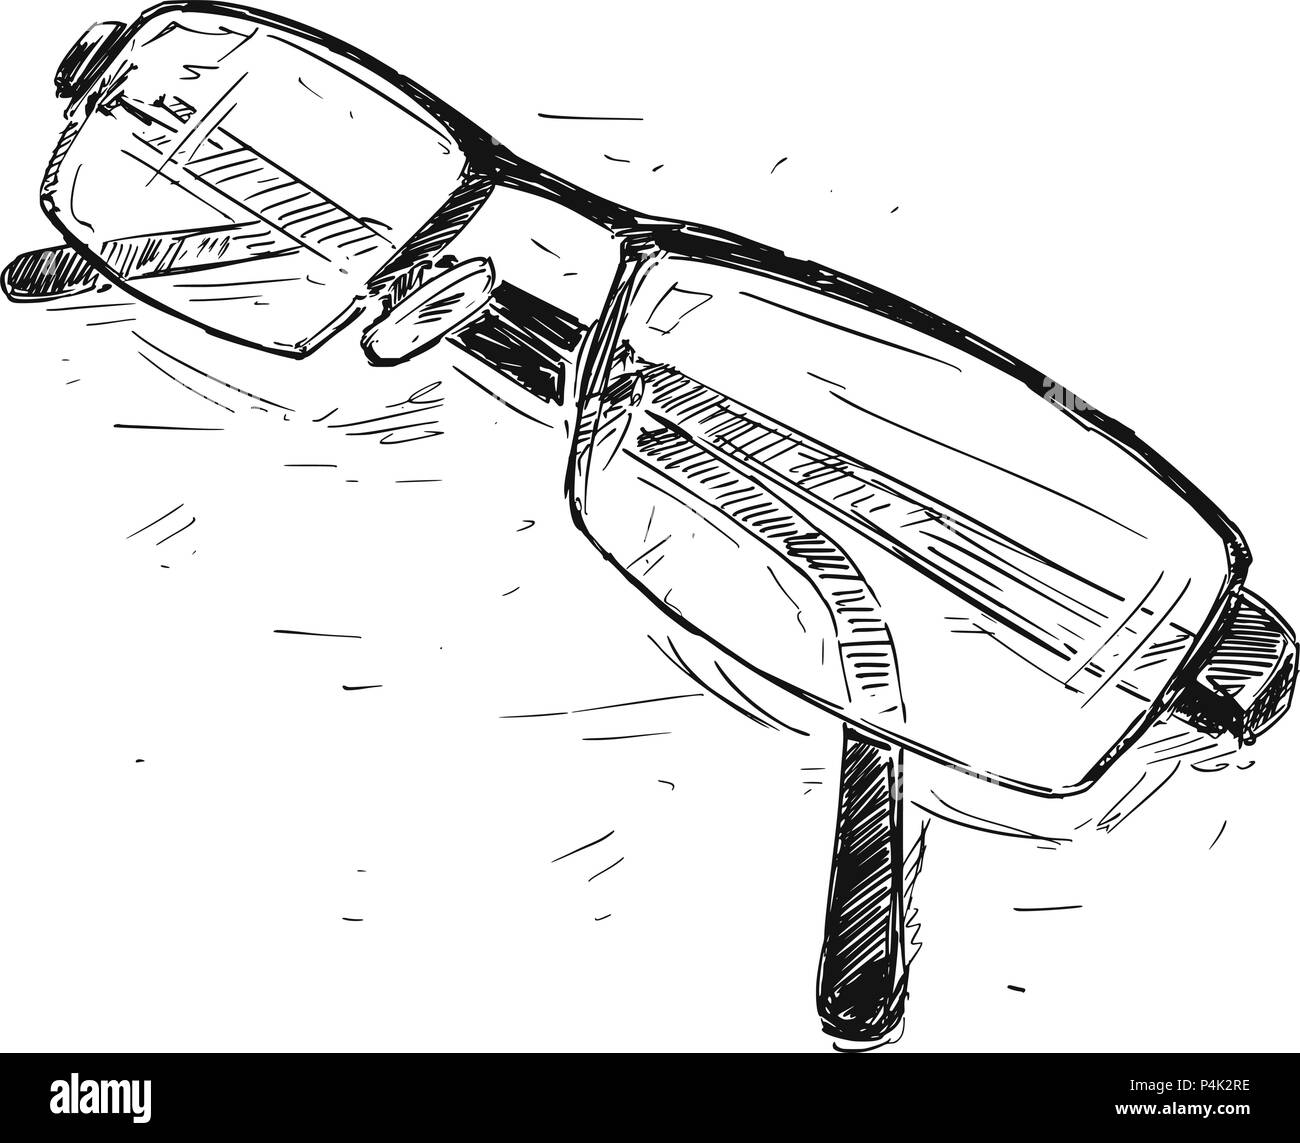 Vector Sketch Drawing Illustration of Glasses Stock Vector